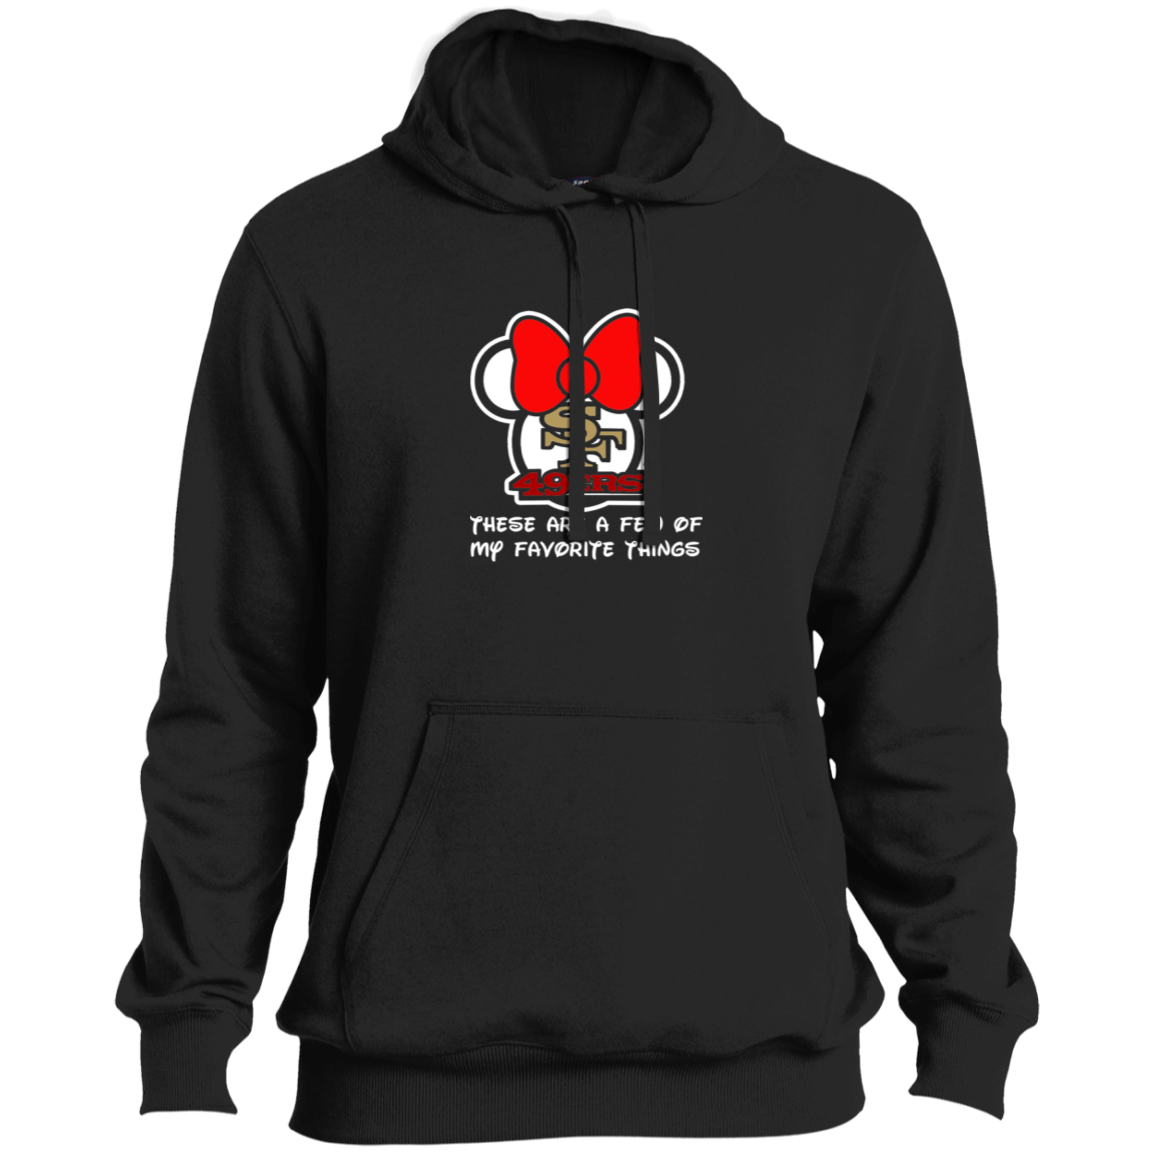 ArtichokeUSA Custom Design #51. These are a few of my favorite things. SF 49ers/Hello Kitty/Mickey Mouse Fan Art. Tall Pullover Hoodie